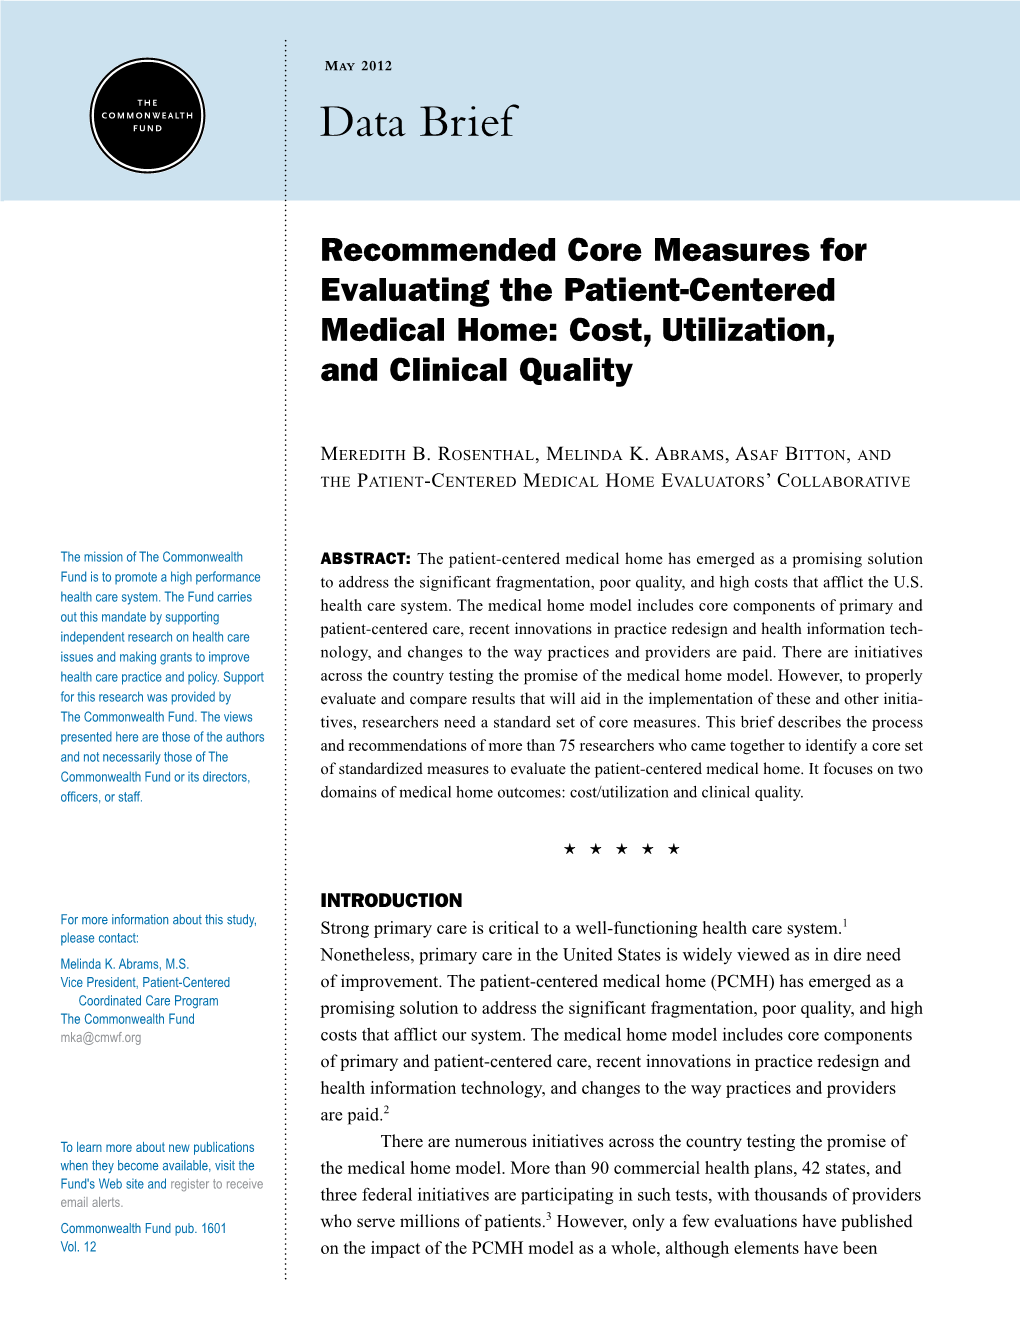 Recommended Core Measures for Evaluating the Patient-Centered Medical Home: Cost, Utilization, and Clinical Quality